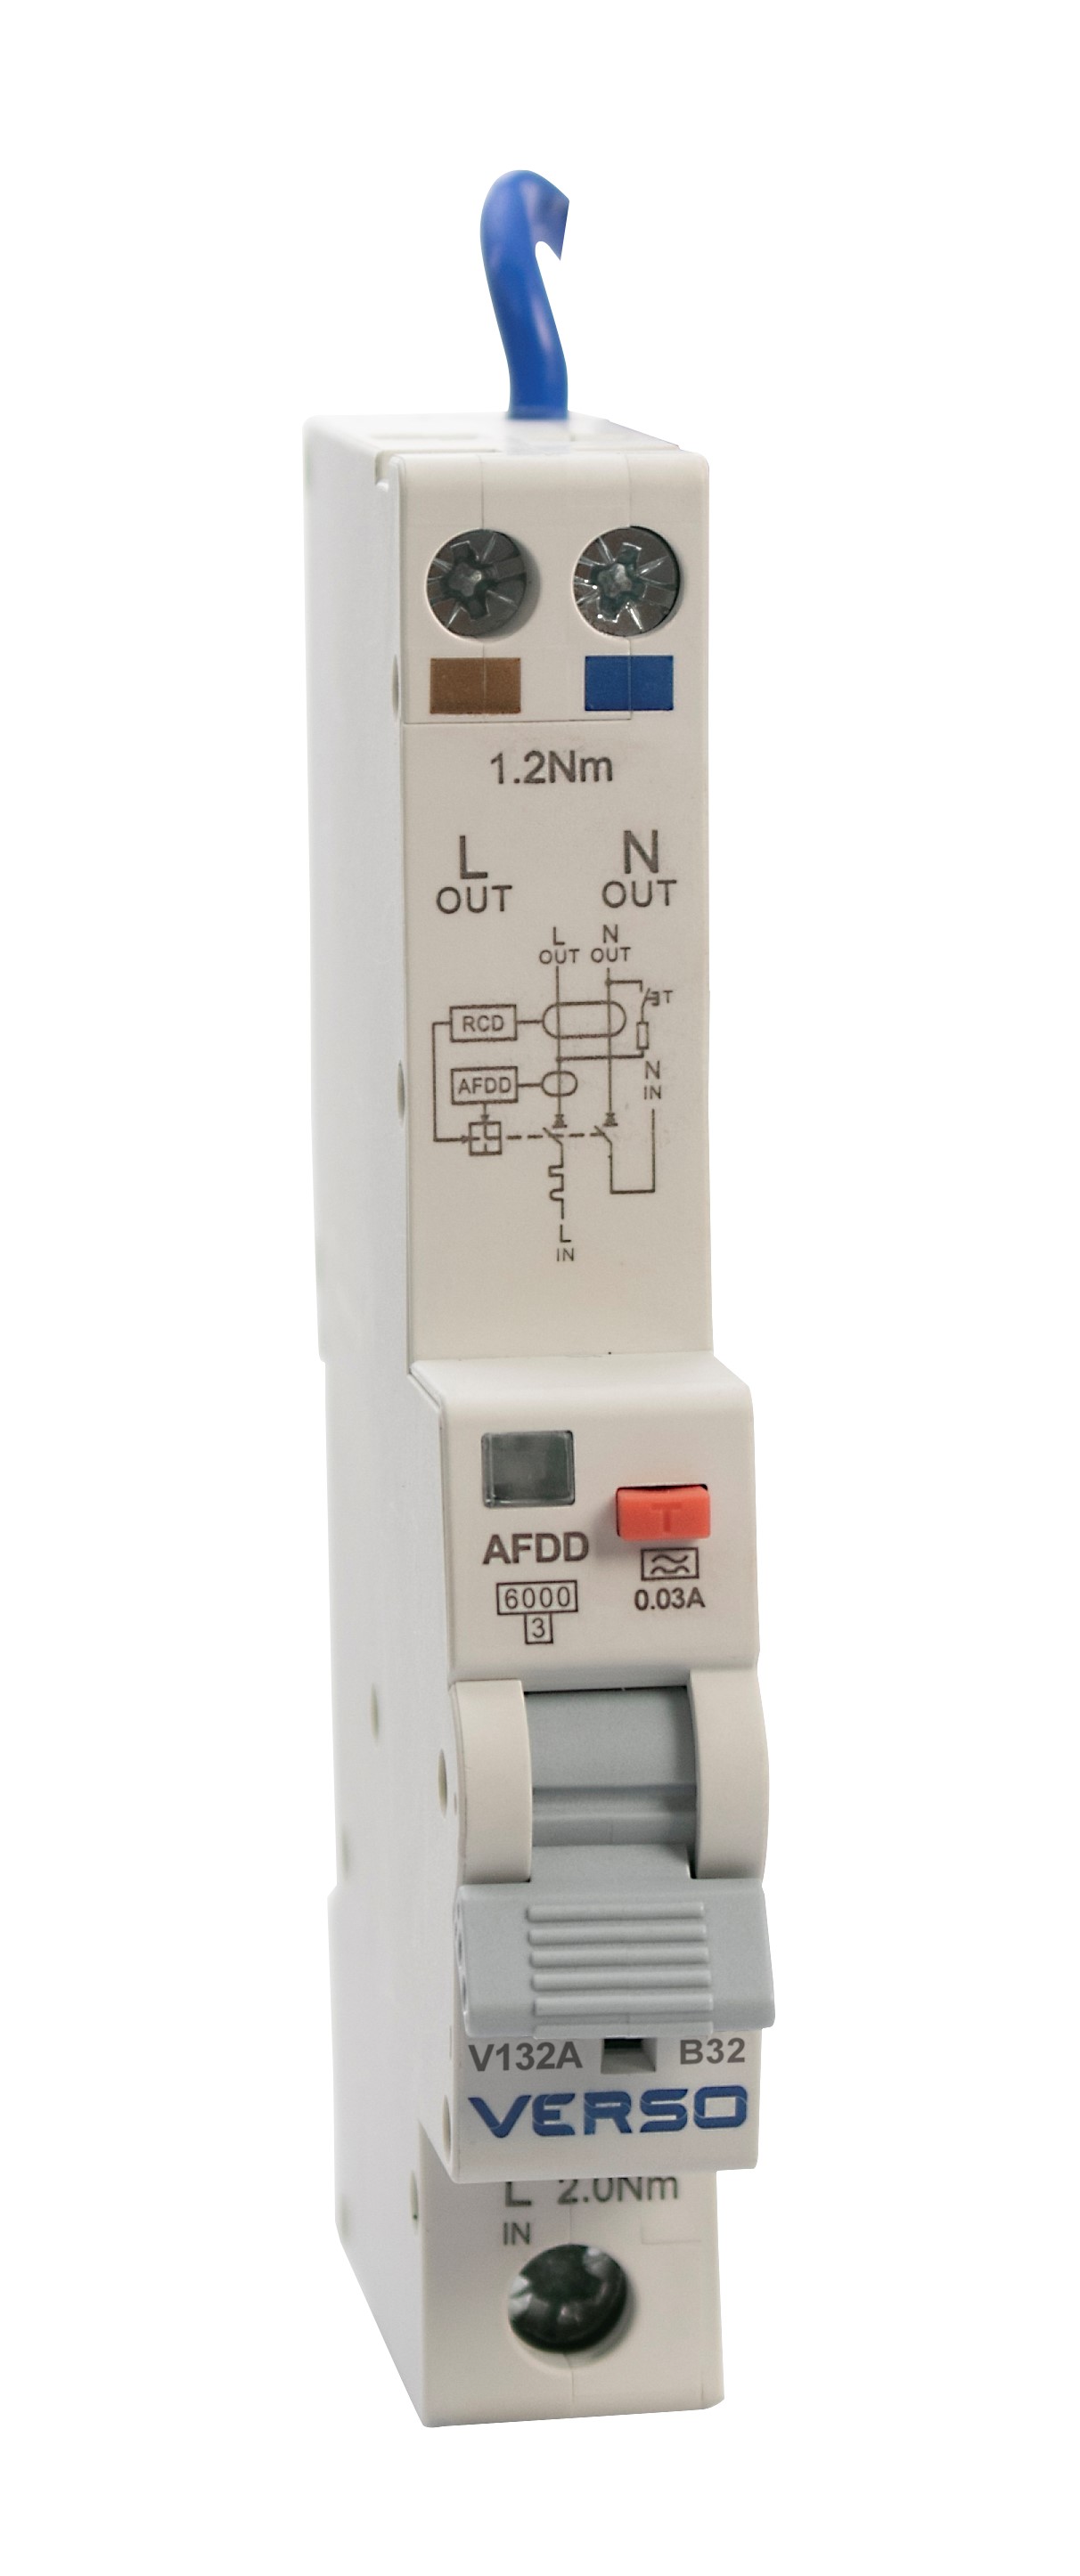 VERSO Arc Fault Detection Devices or AFDD’s 